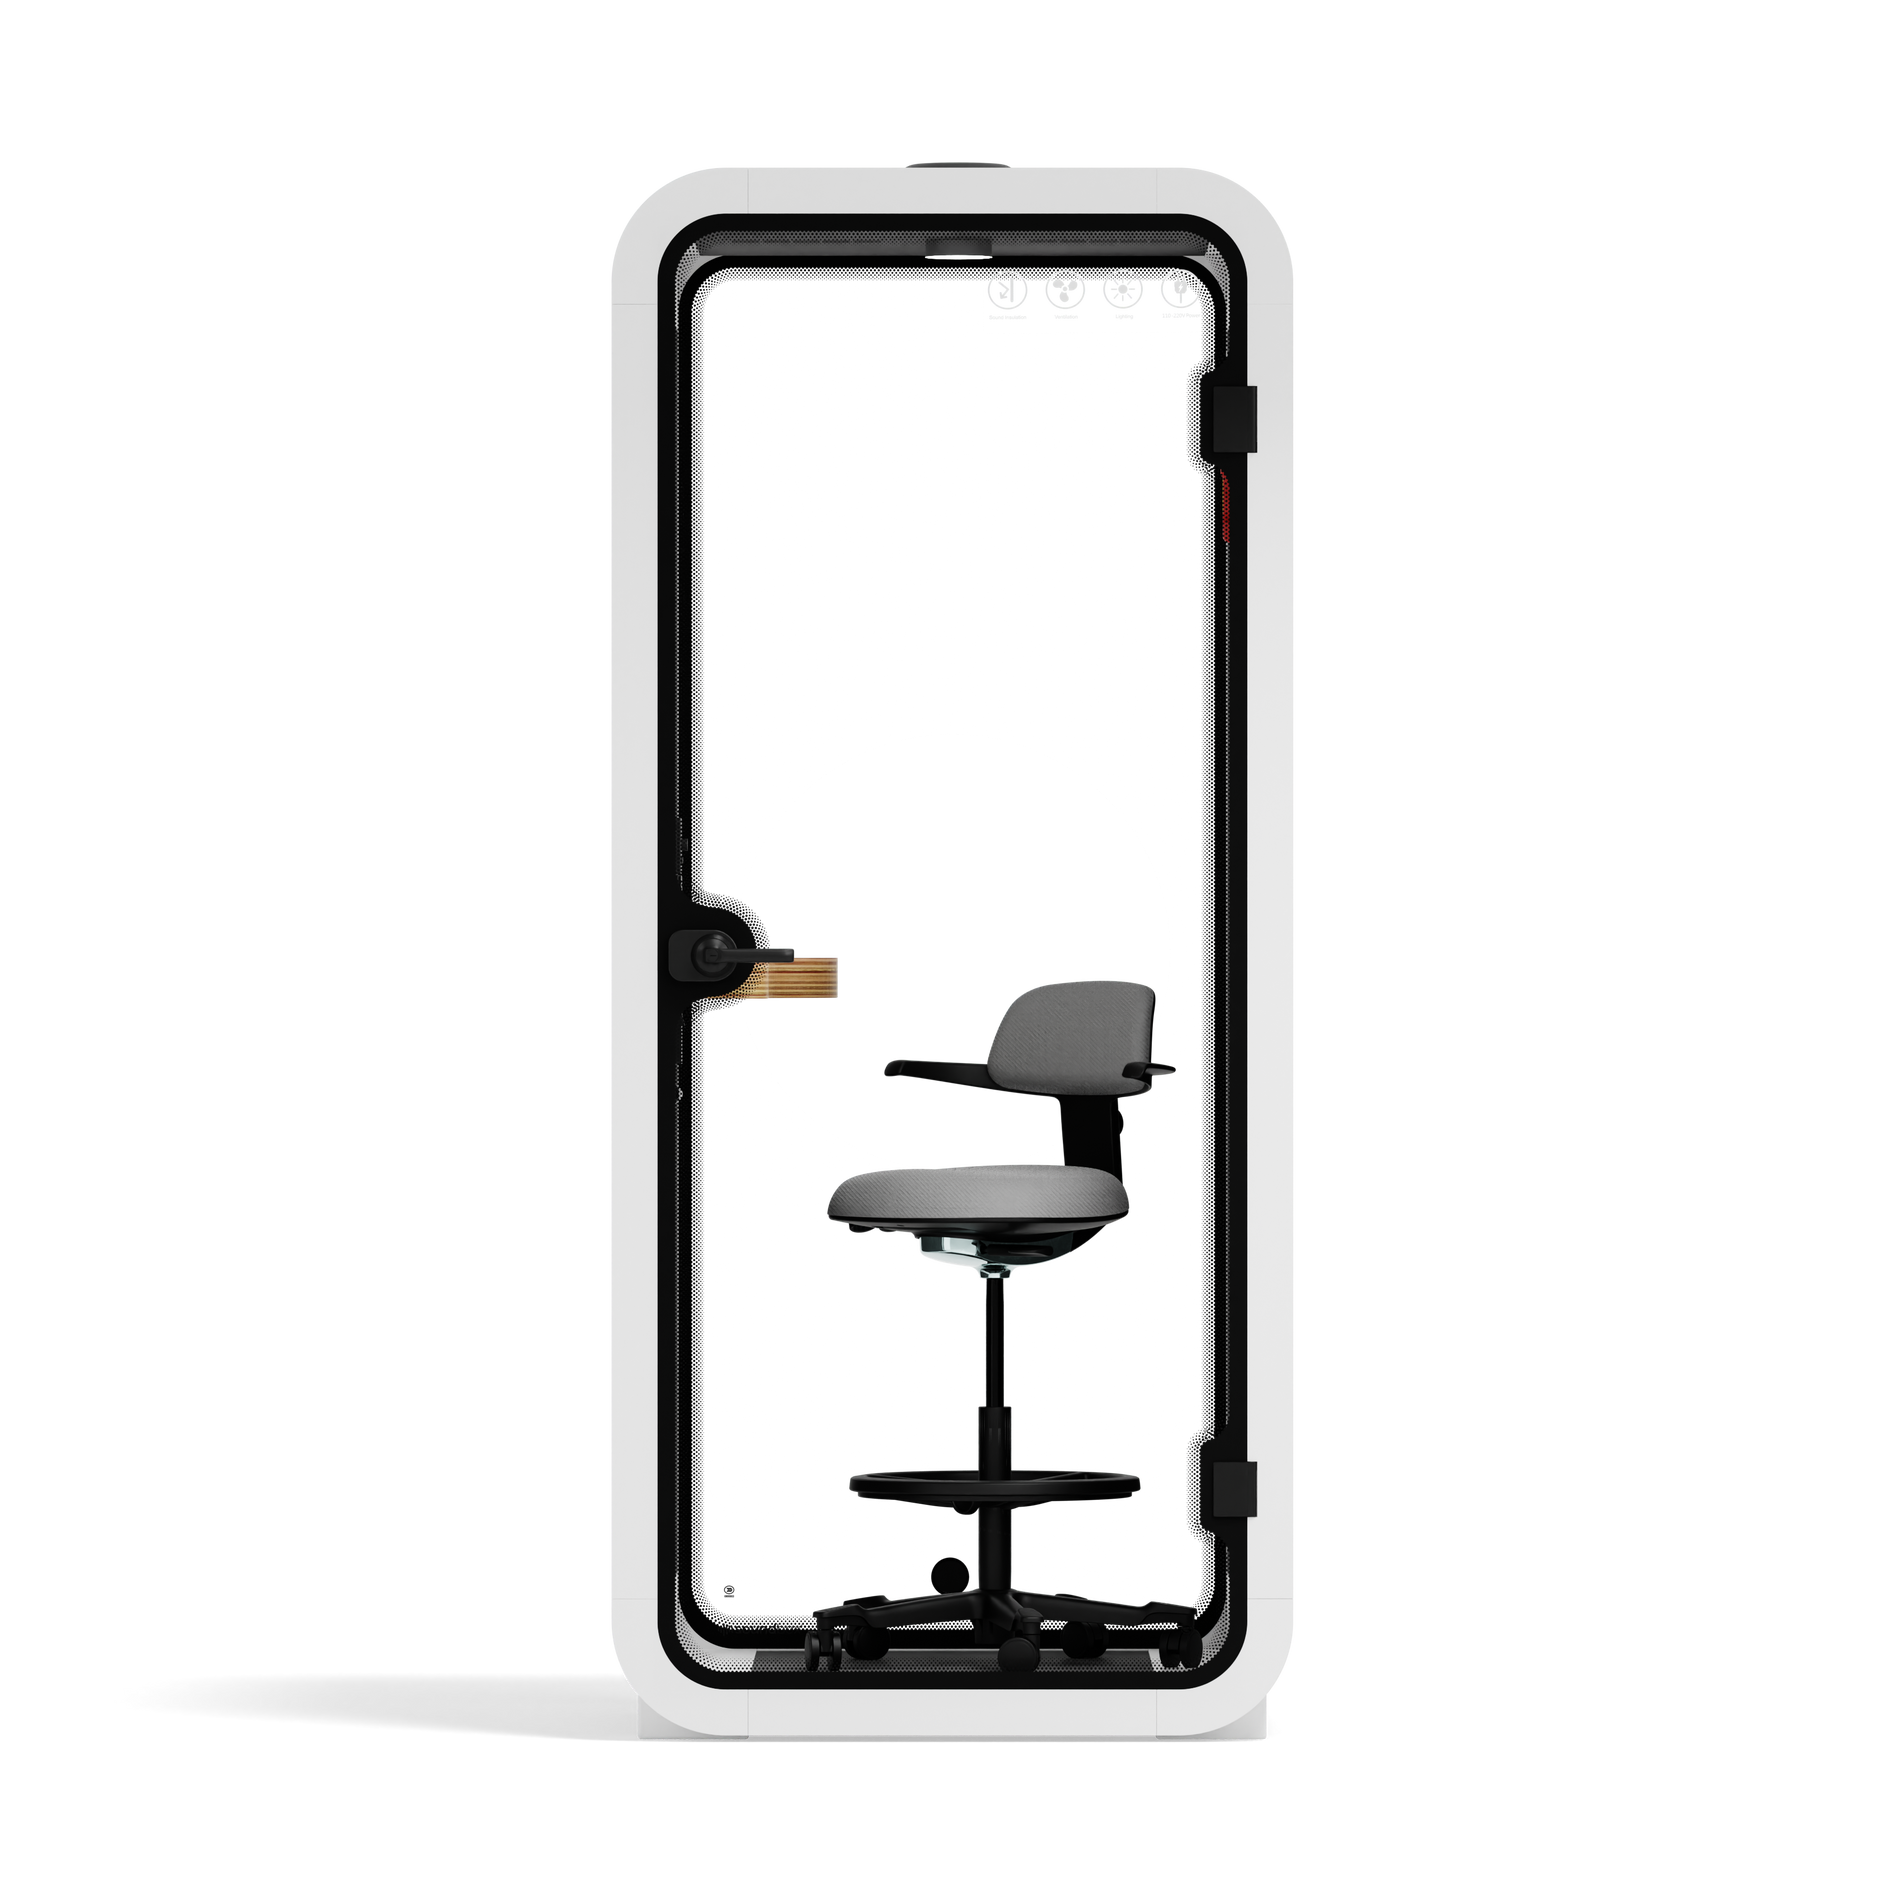 Quell Acoustic Phone BoothWhite / Dark Grey / With Furniture